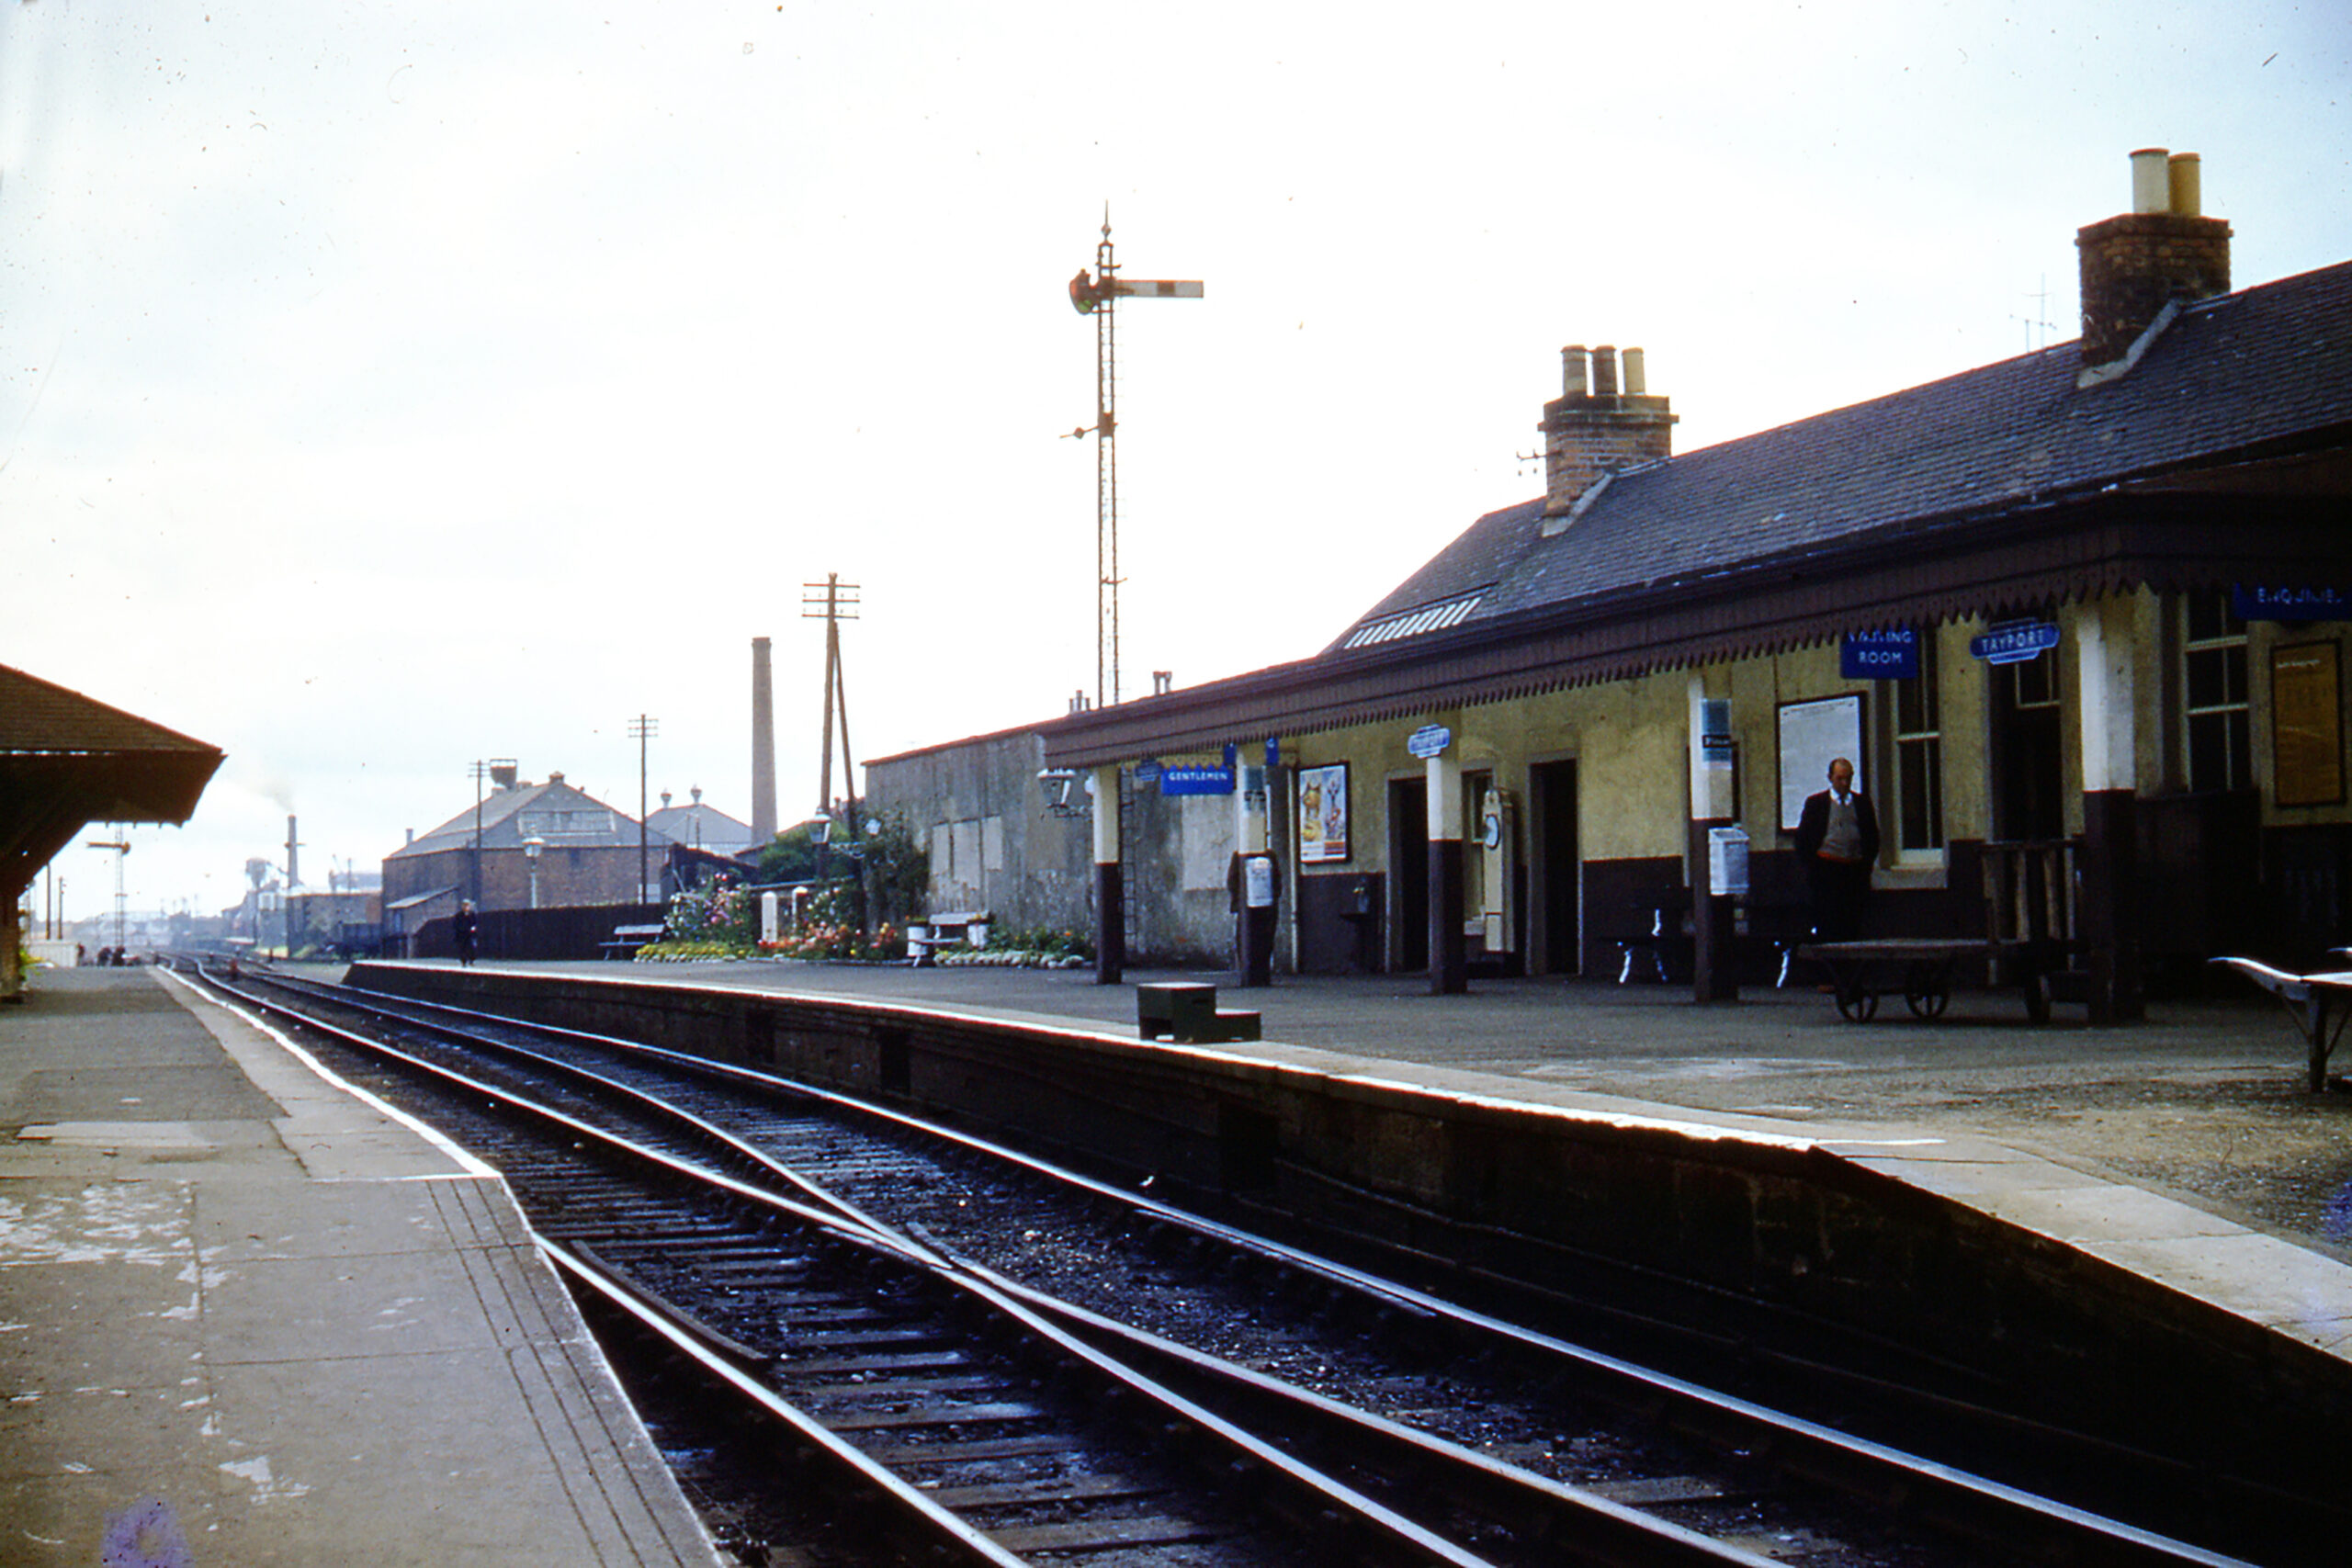 Tayport Heritage Trail - Board 1 - Main Station building looking east towards Leuchars (upside to Dundee on right)